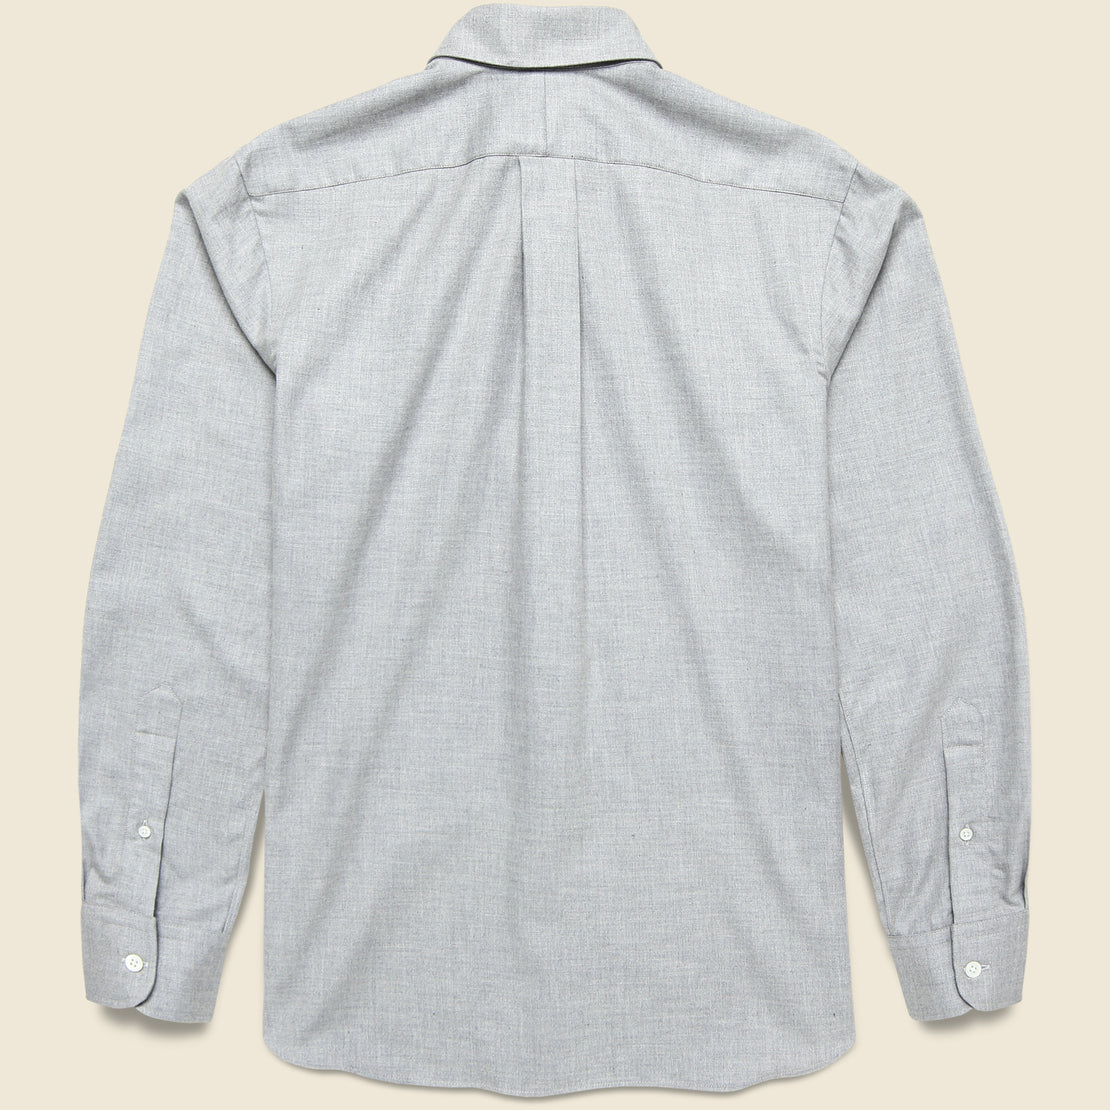 Solid Melange Sport Shirt - Grey - Hamilton Shirt Co. - STAG Provisions - Tops - L/S Woven - Solid